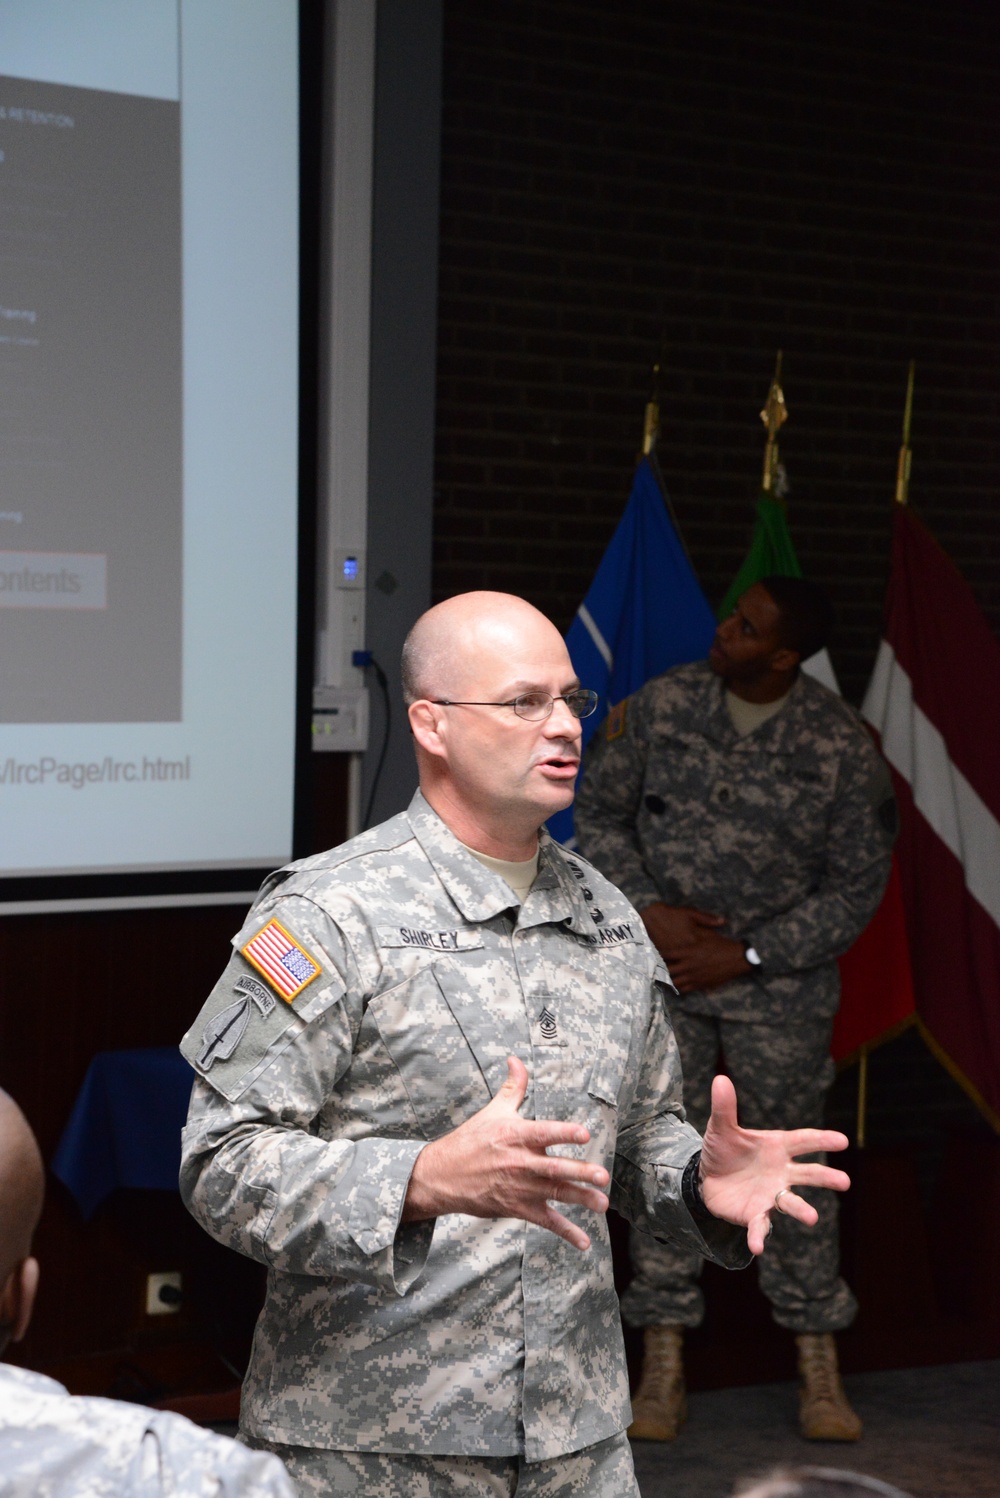 AG corps Chief Warrant Officer 5 Jones and Command Sgt. Maj. Shirley briefing in SHAPE